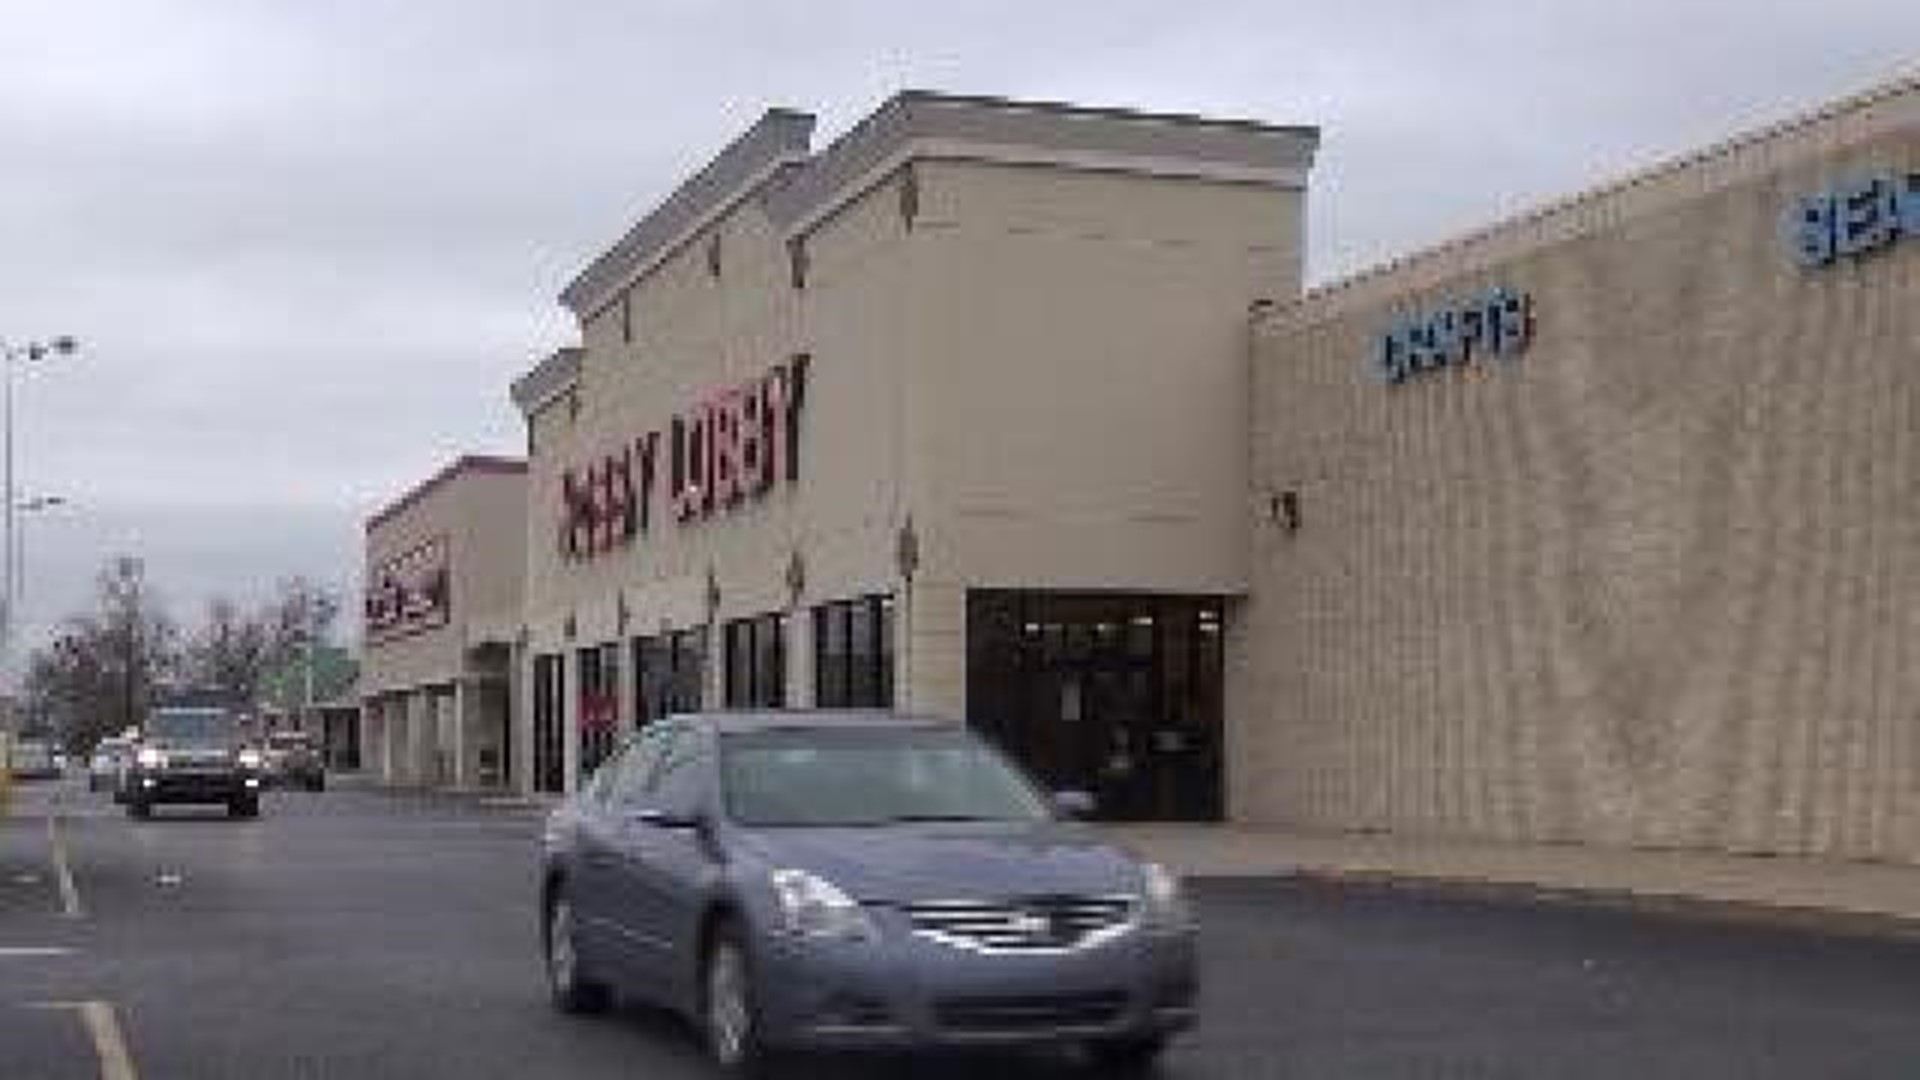 Hobby Lobby Shoppers Support Store\'s Religious Stance